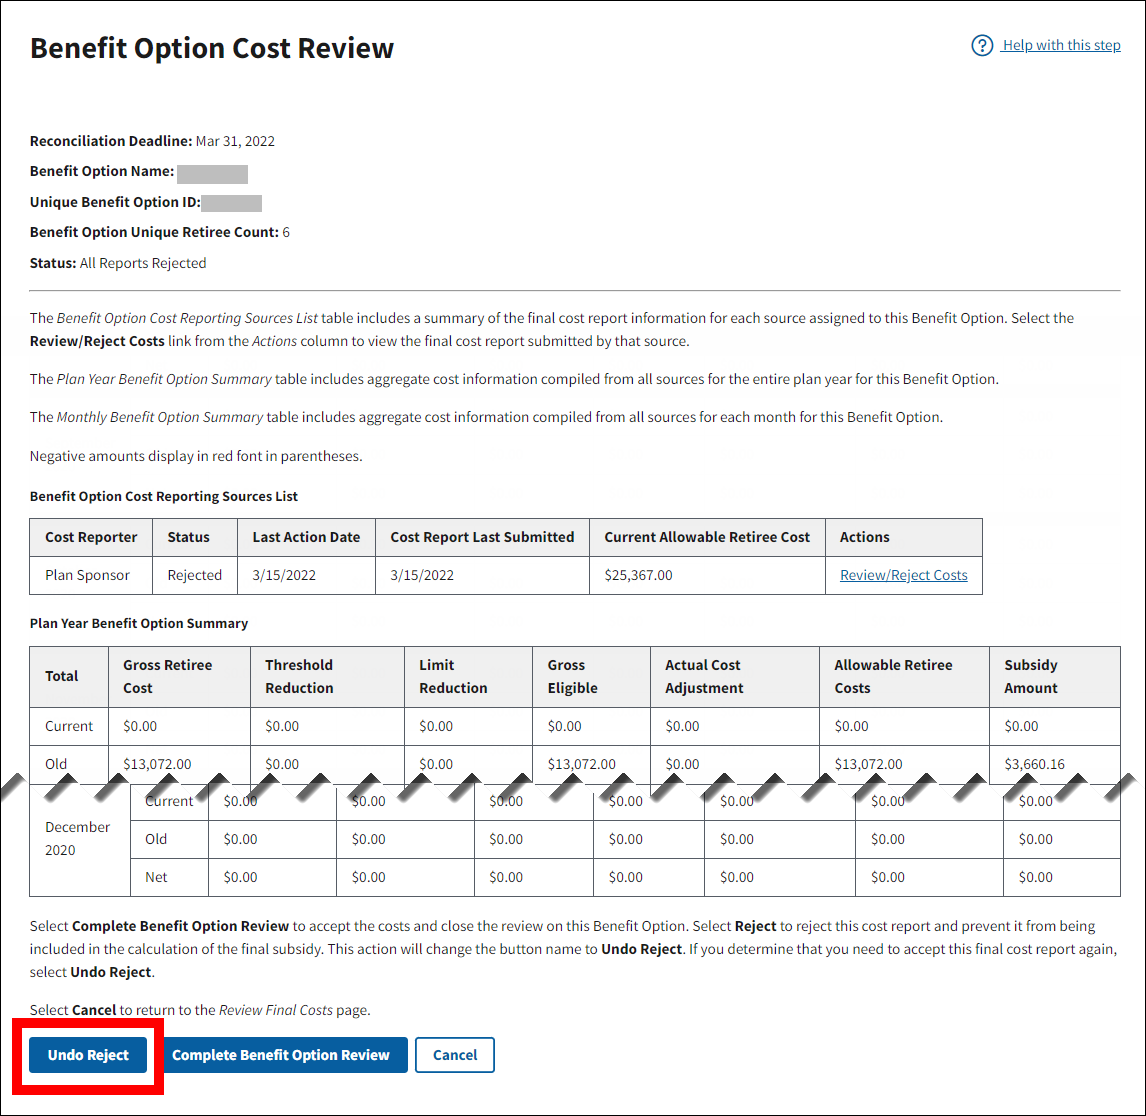 Benefit Option Cost Review page with sample data. Undo Reject button is highlighted.